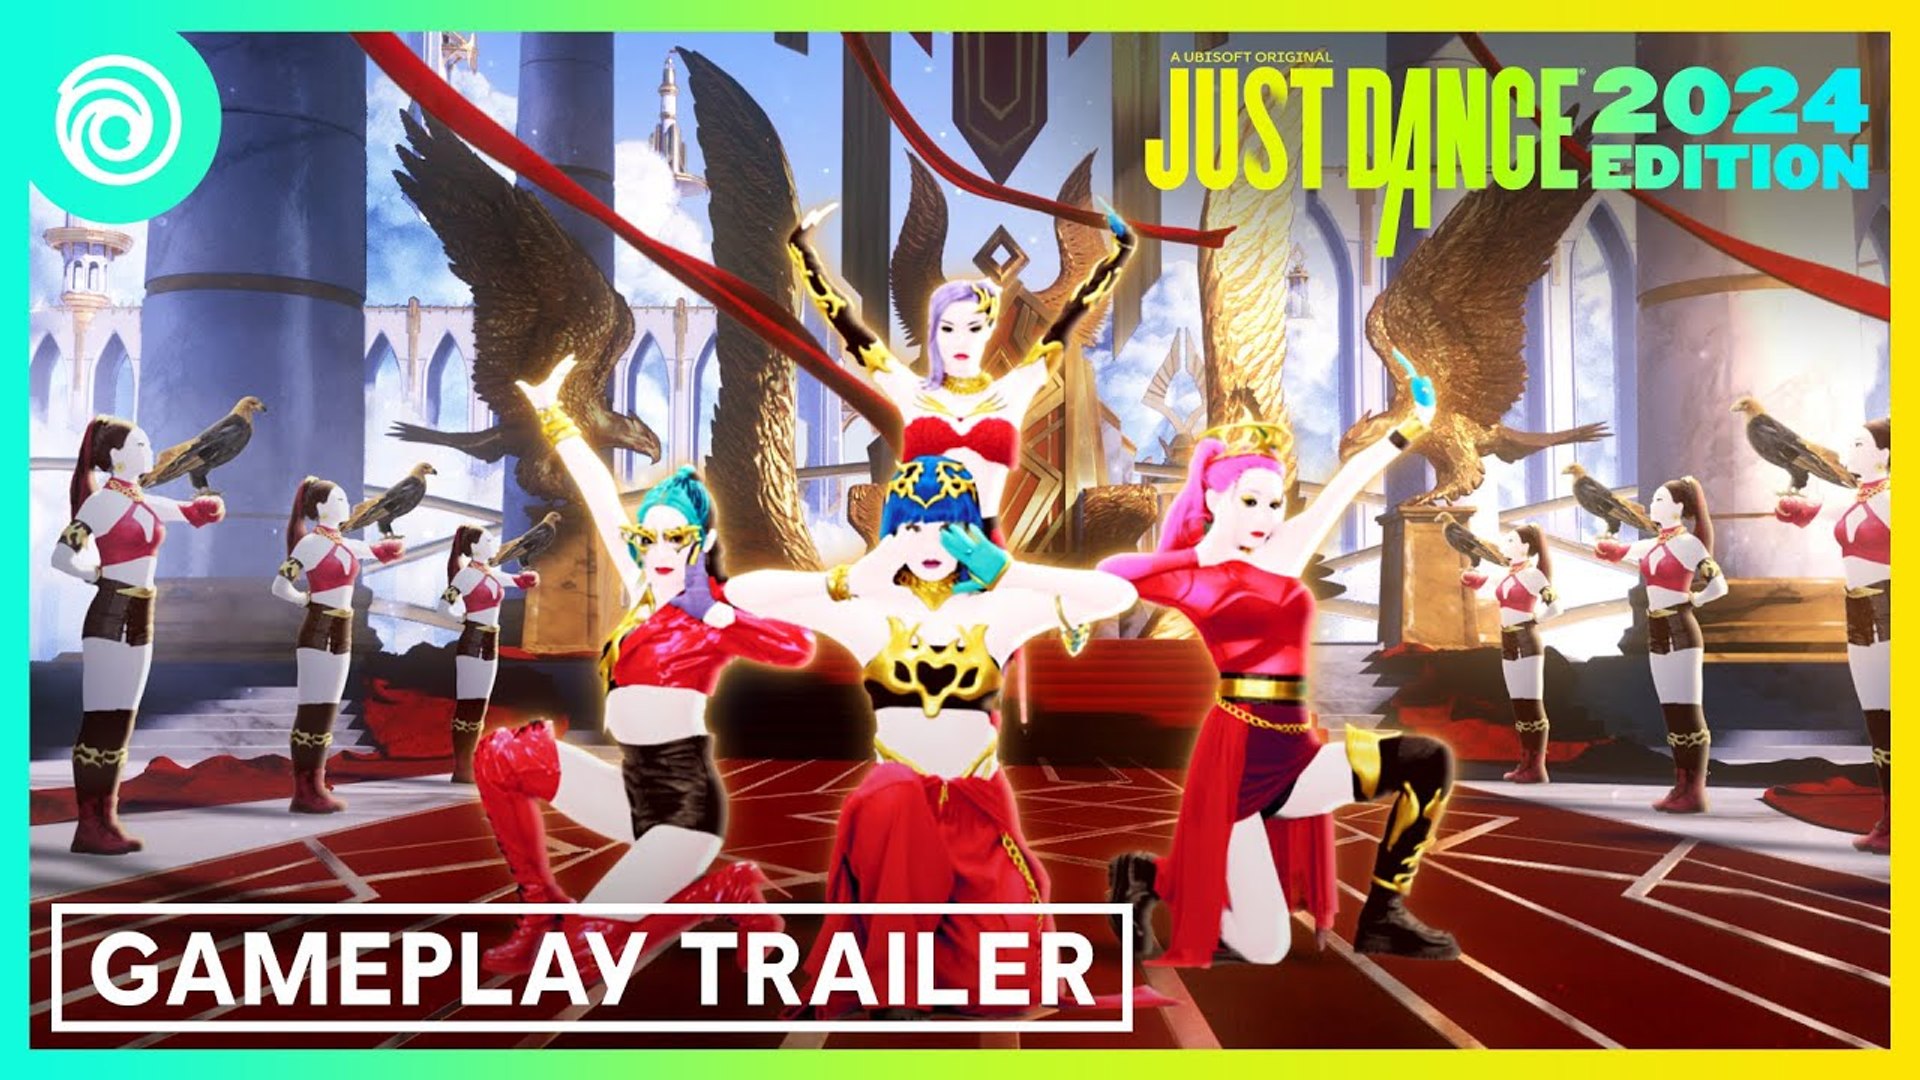 Just Dance 2024 Edition - Story Playlist Trailer 